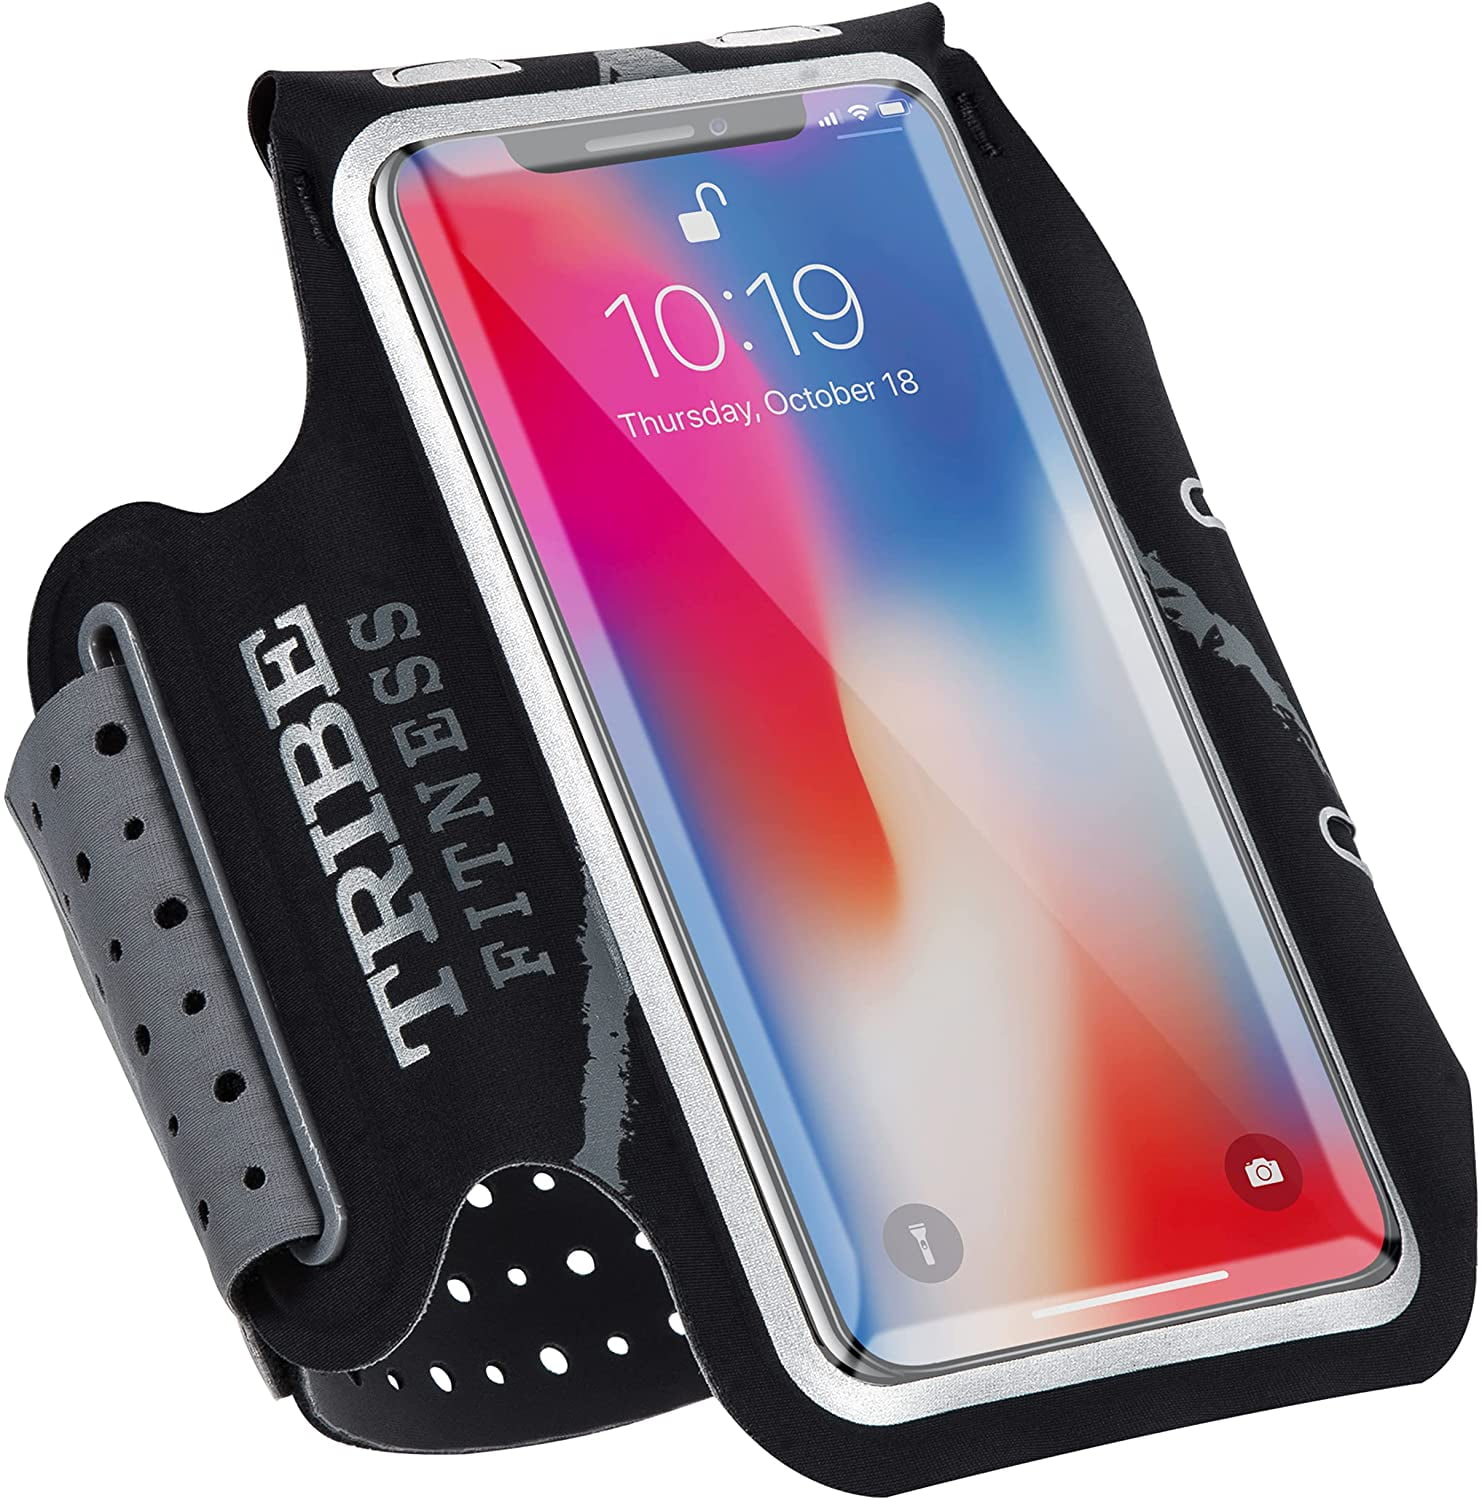 Samsung Galaxy Sports Gym Running Jogging Armband Case Pouch For Mobile's Apple 